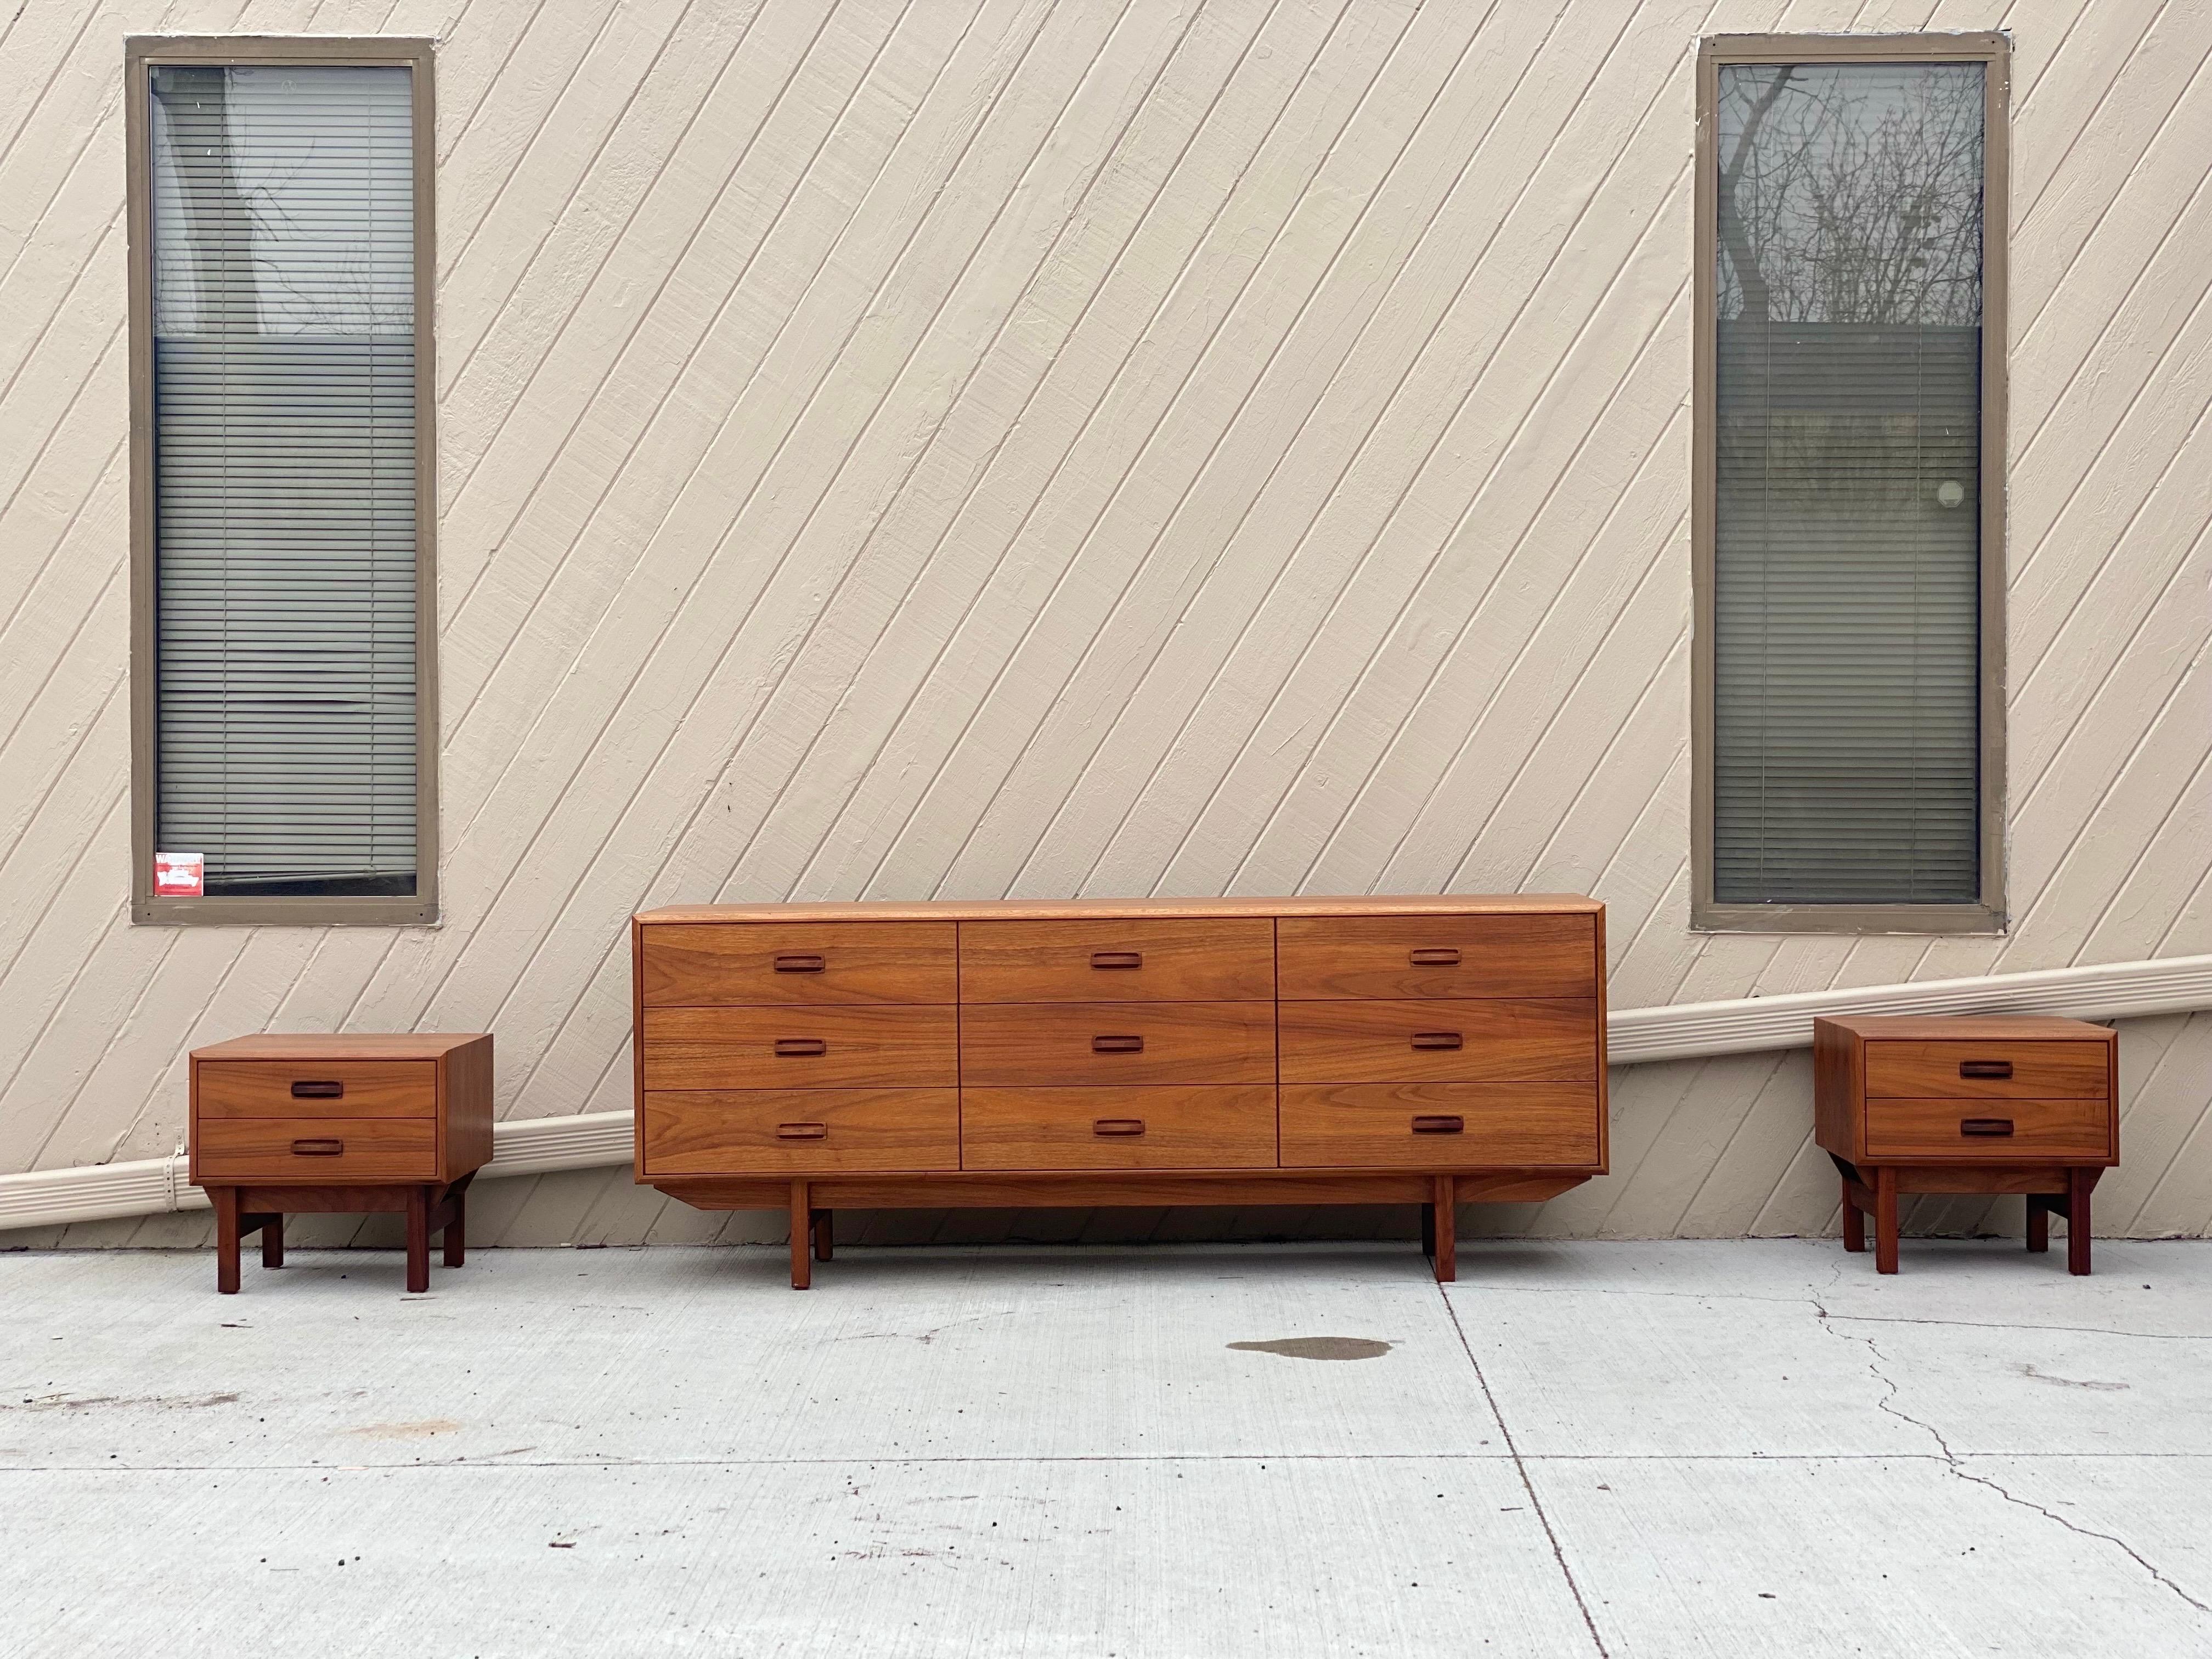 We are very pleased to offer a modern, Scandinavian three-piece bedroom set, circa the 1960s. If you love clean lines and honey brown wood tones, along with excellent artistry, this collection is perfect for your space. Crafted of teak wood and